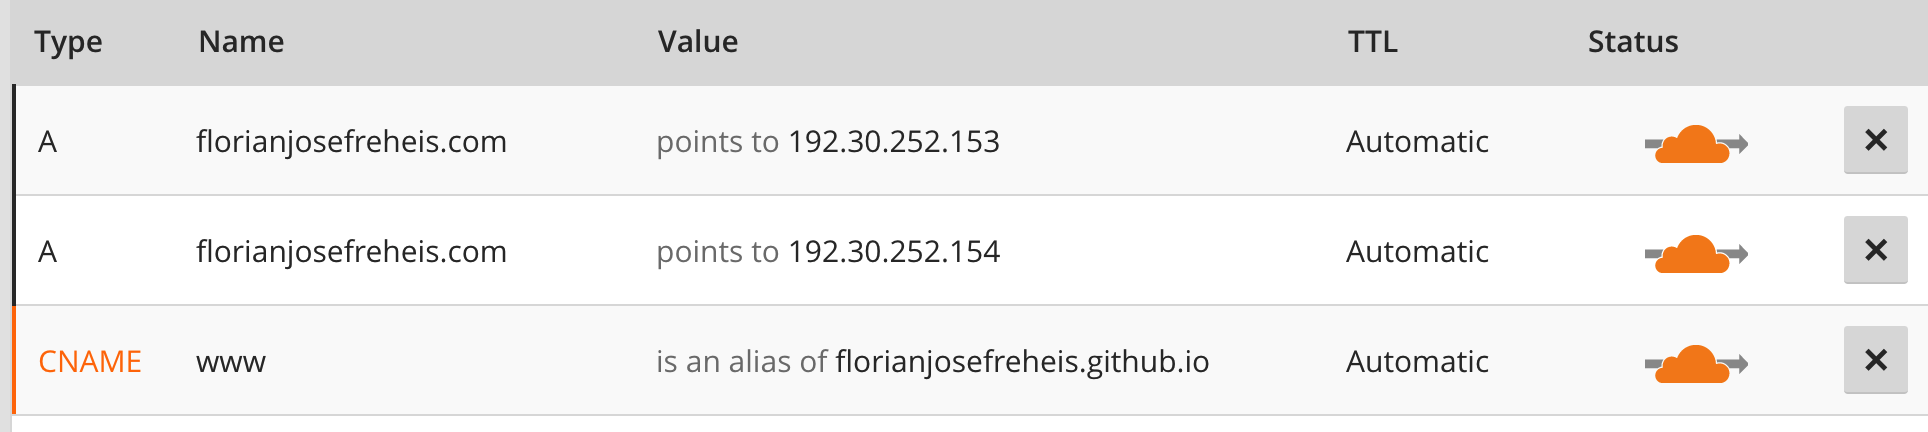 CloudFlare DNS Settings